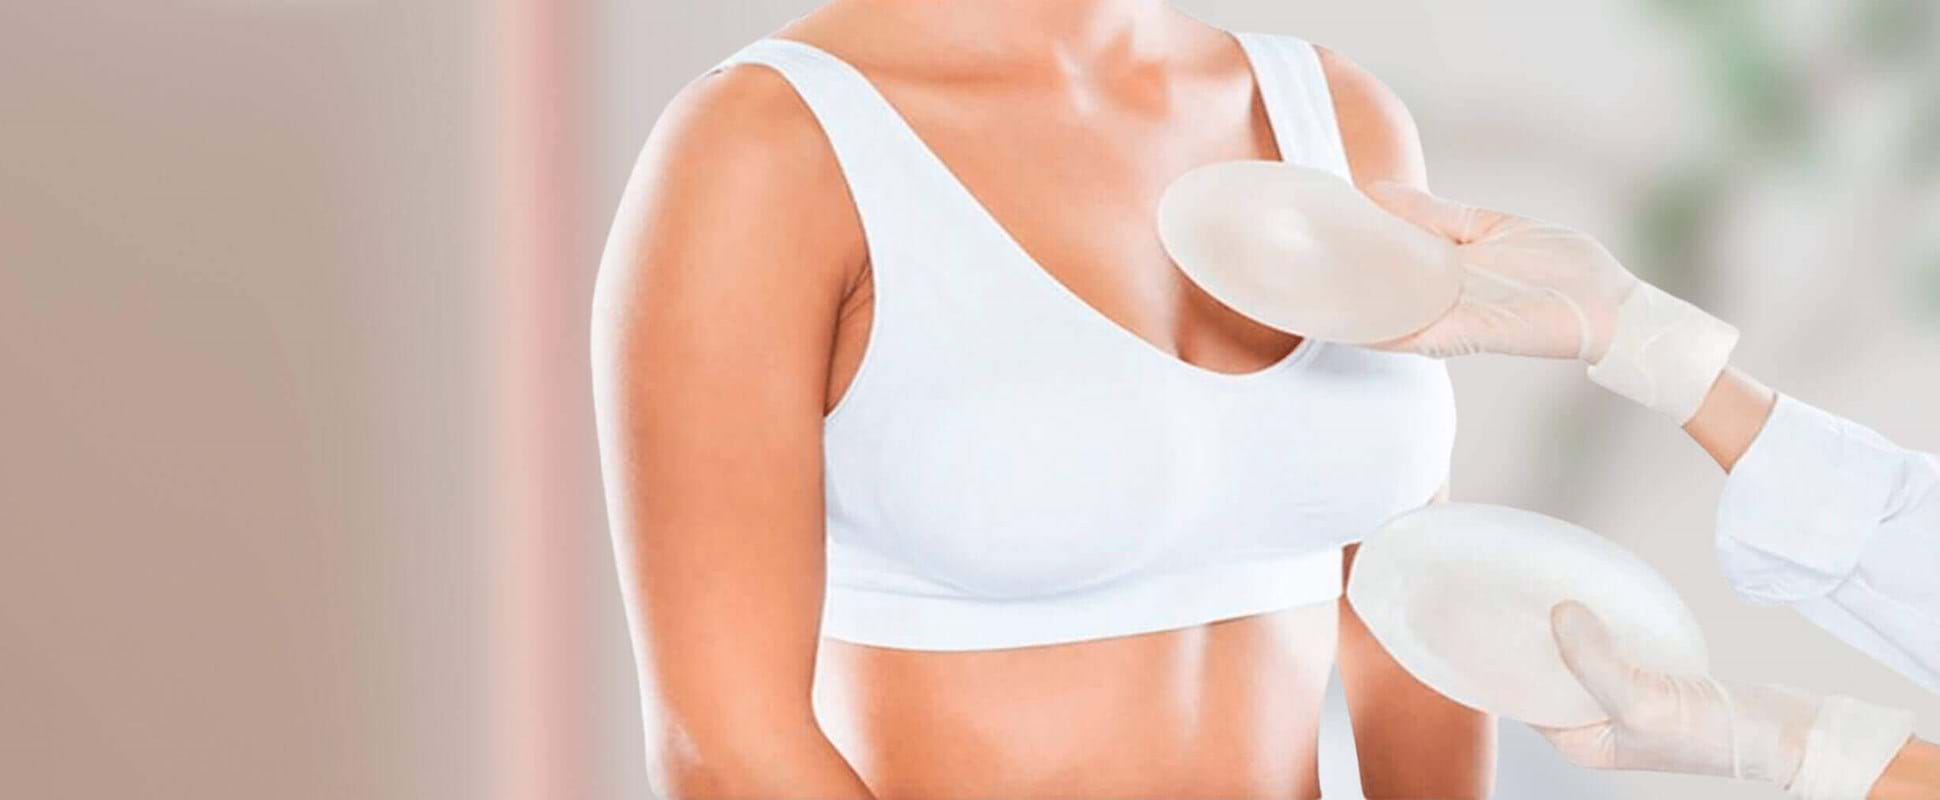 Silicone Breast Prostheses Repair Tips - A Fitting Experience